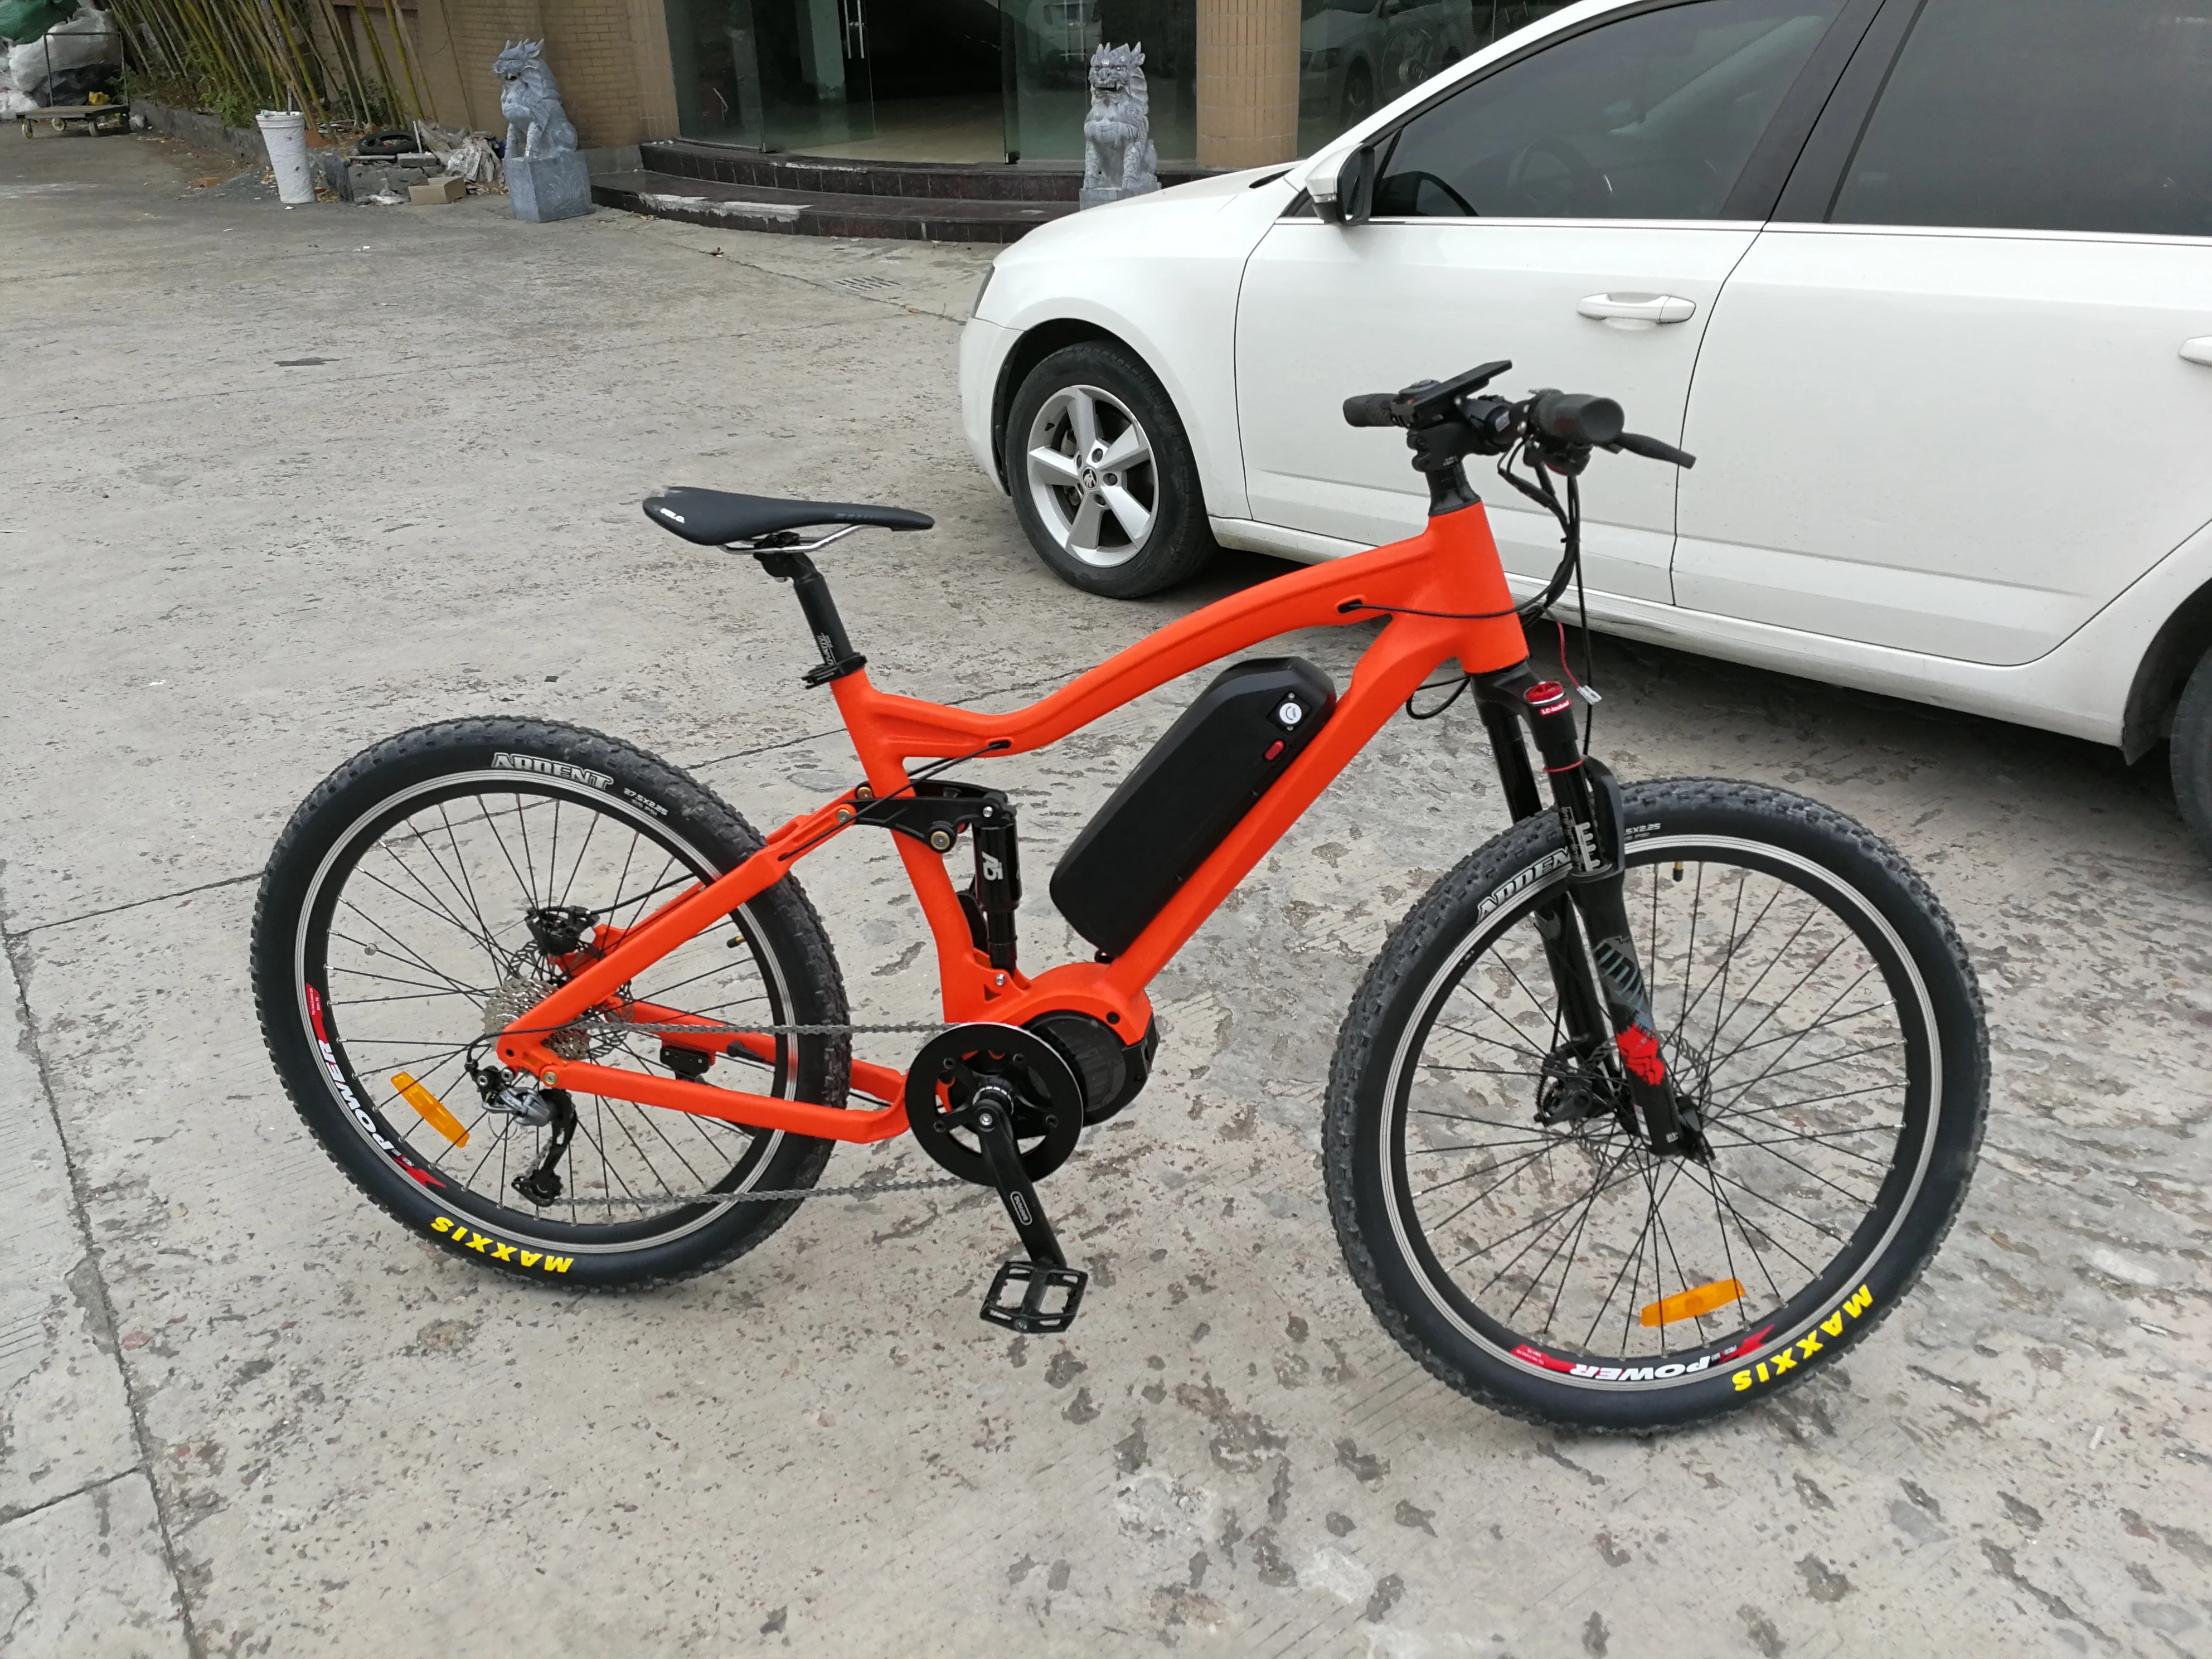 
Bafang G510 mountain electric bike 27.5 x 2.8 inch M620 full suspension 19 inch aluminum alloy ultra frame for 8fun M620 